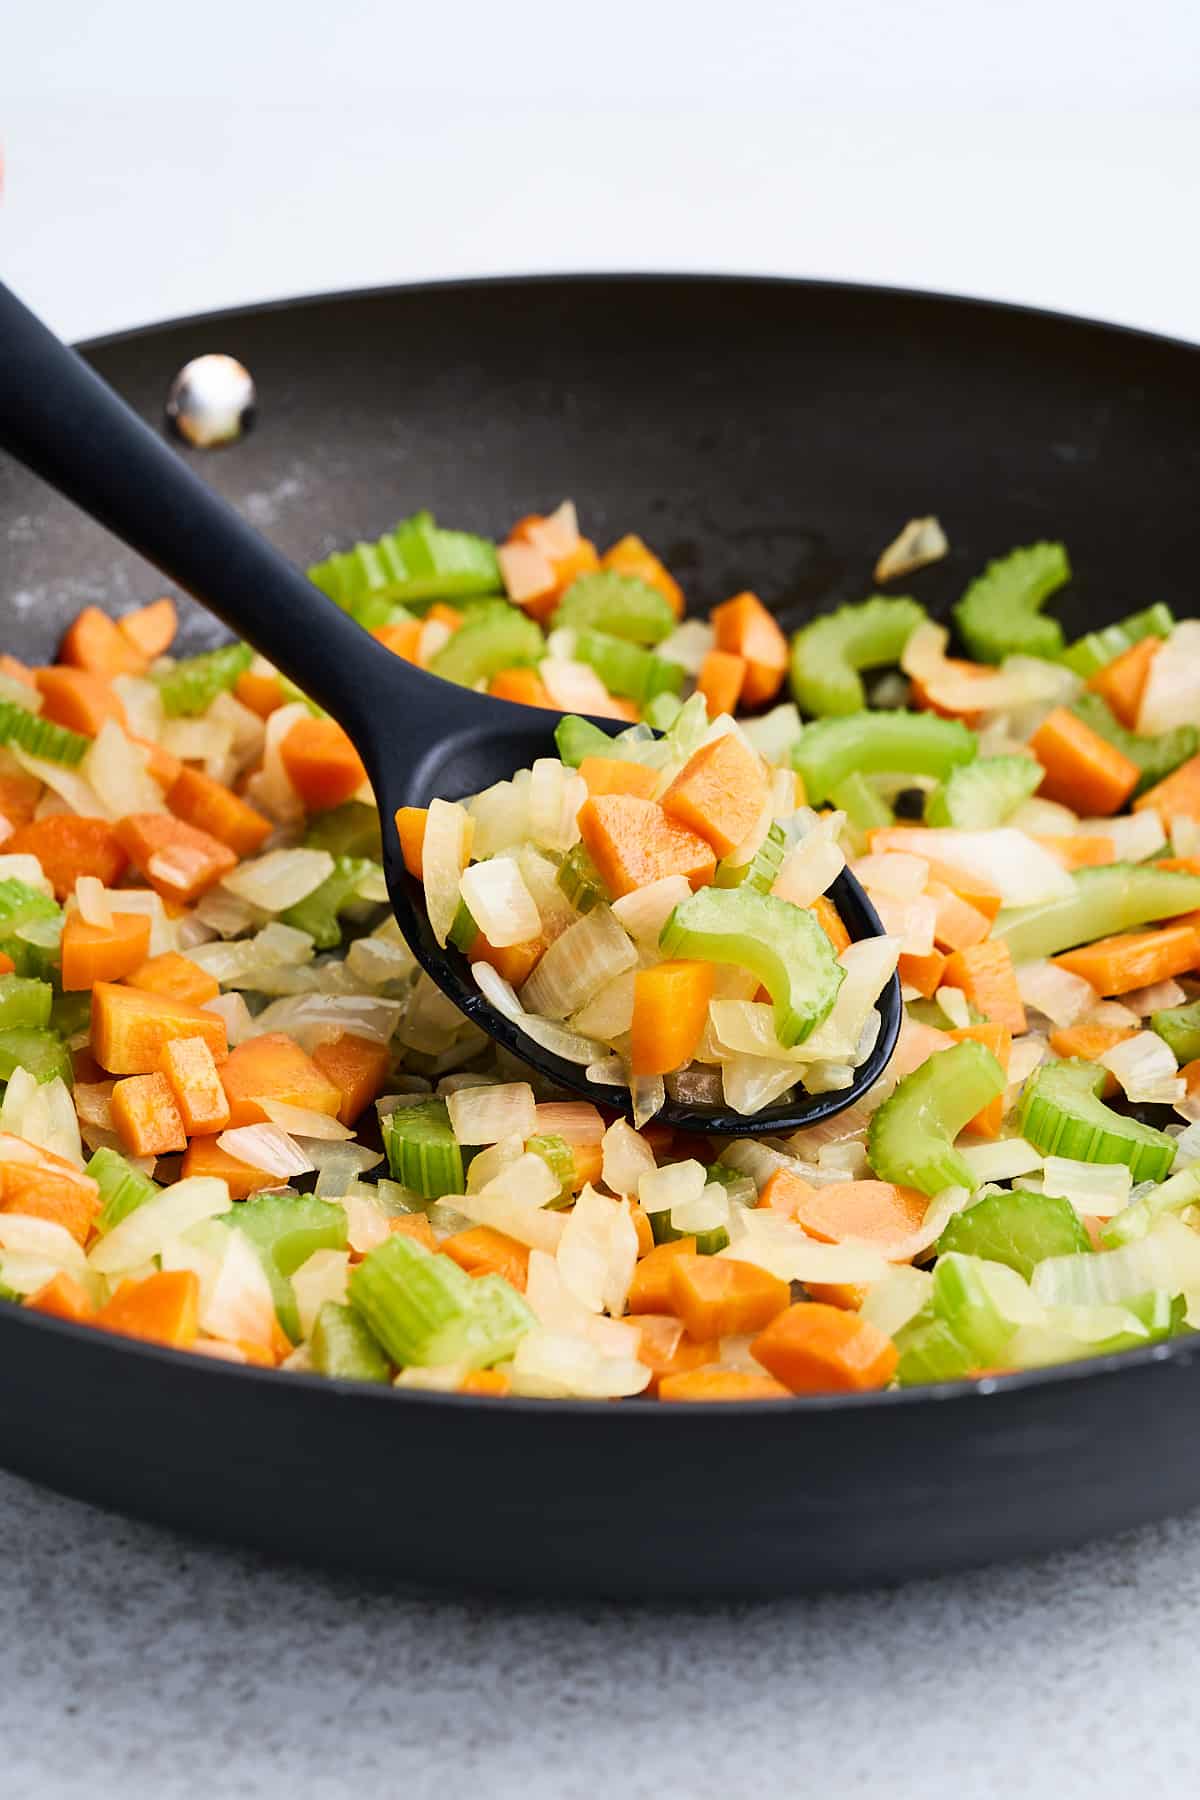 How to cook mirepoix.